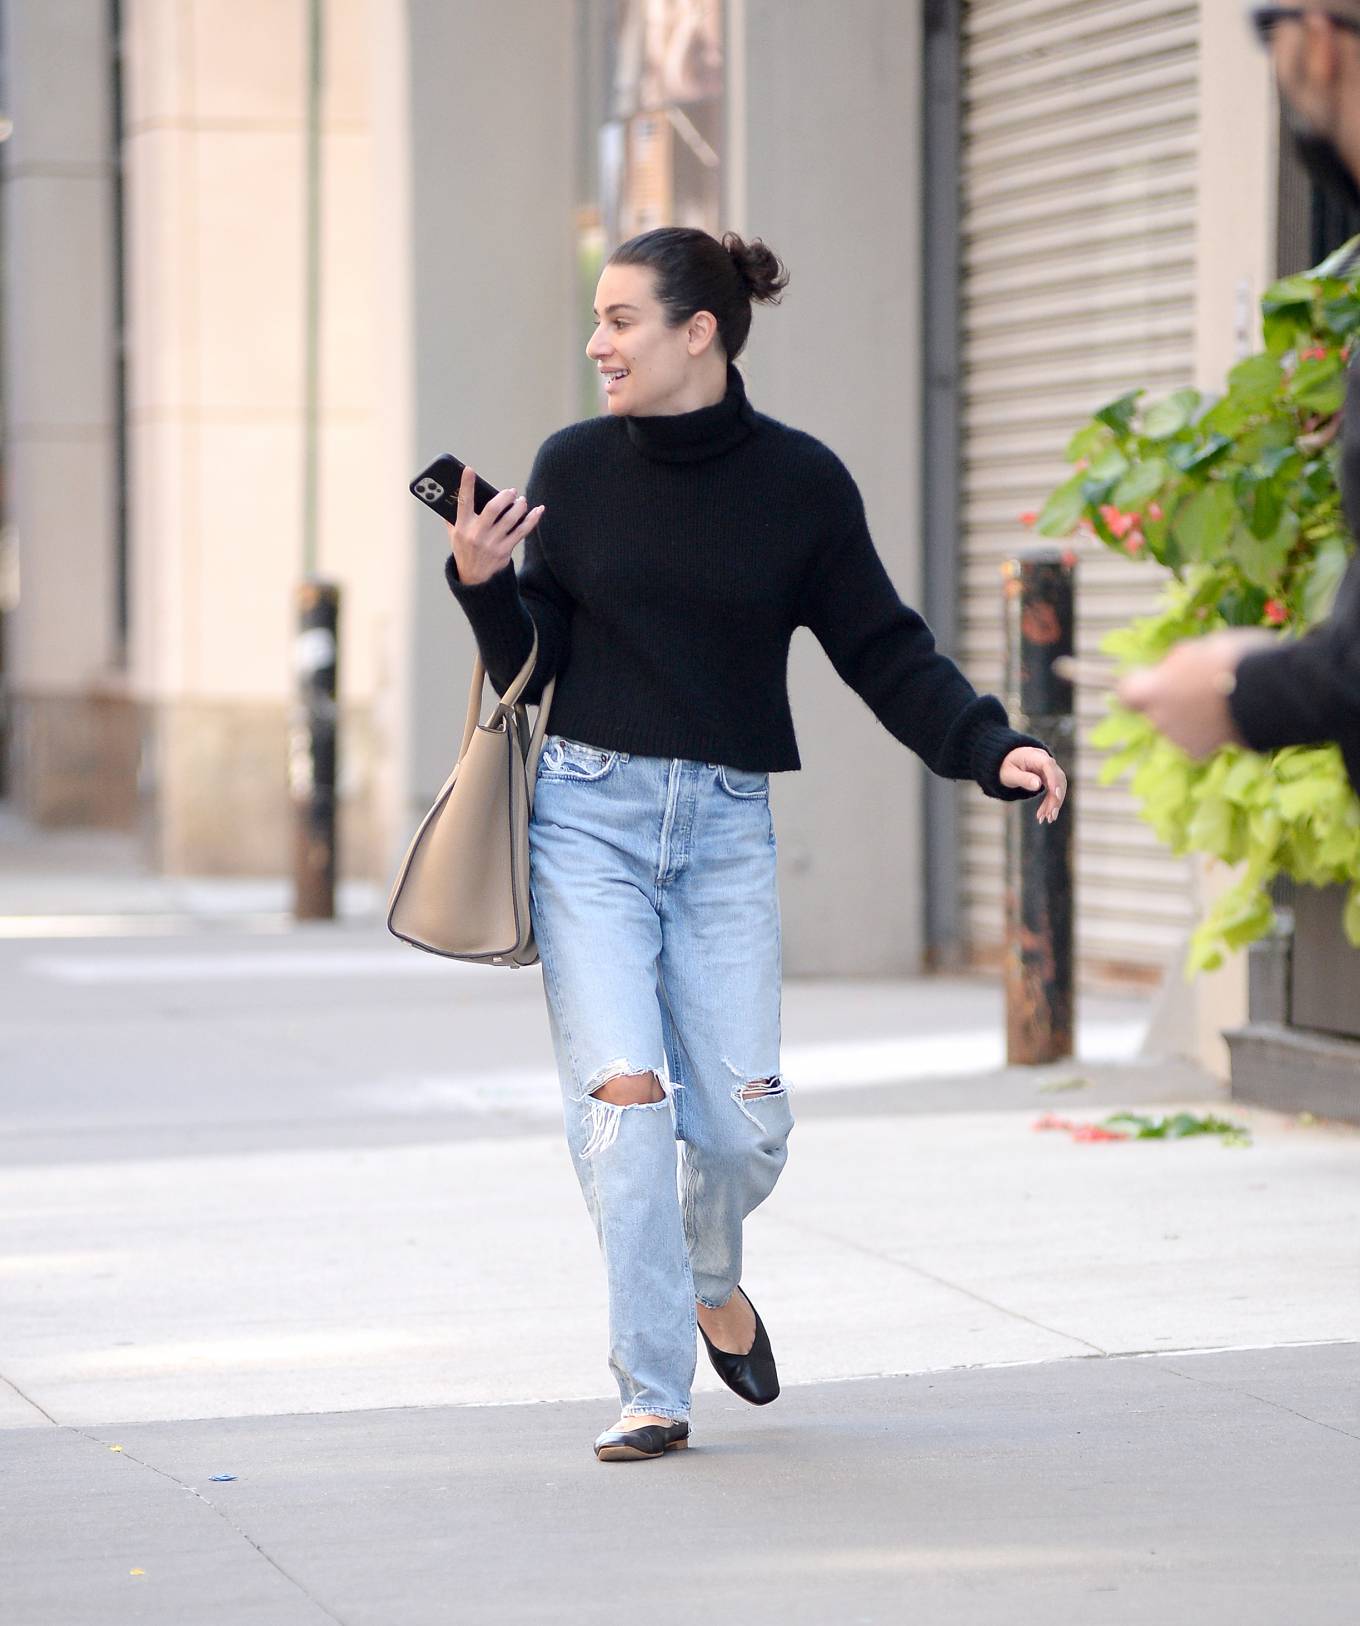 Lea Michele 2022 : Lea Michele – Stepping out in New York-08